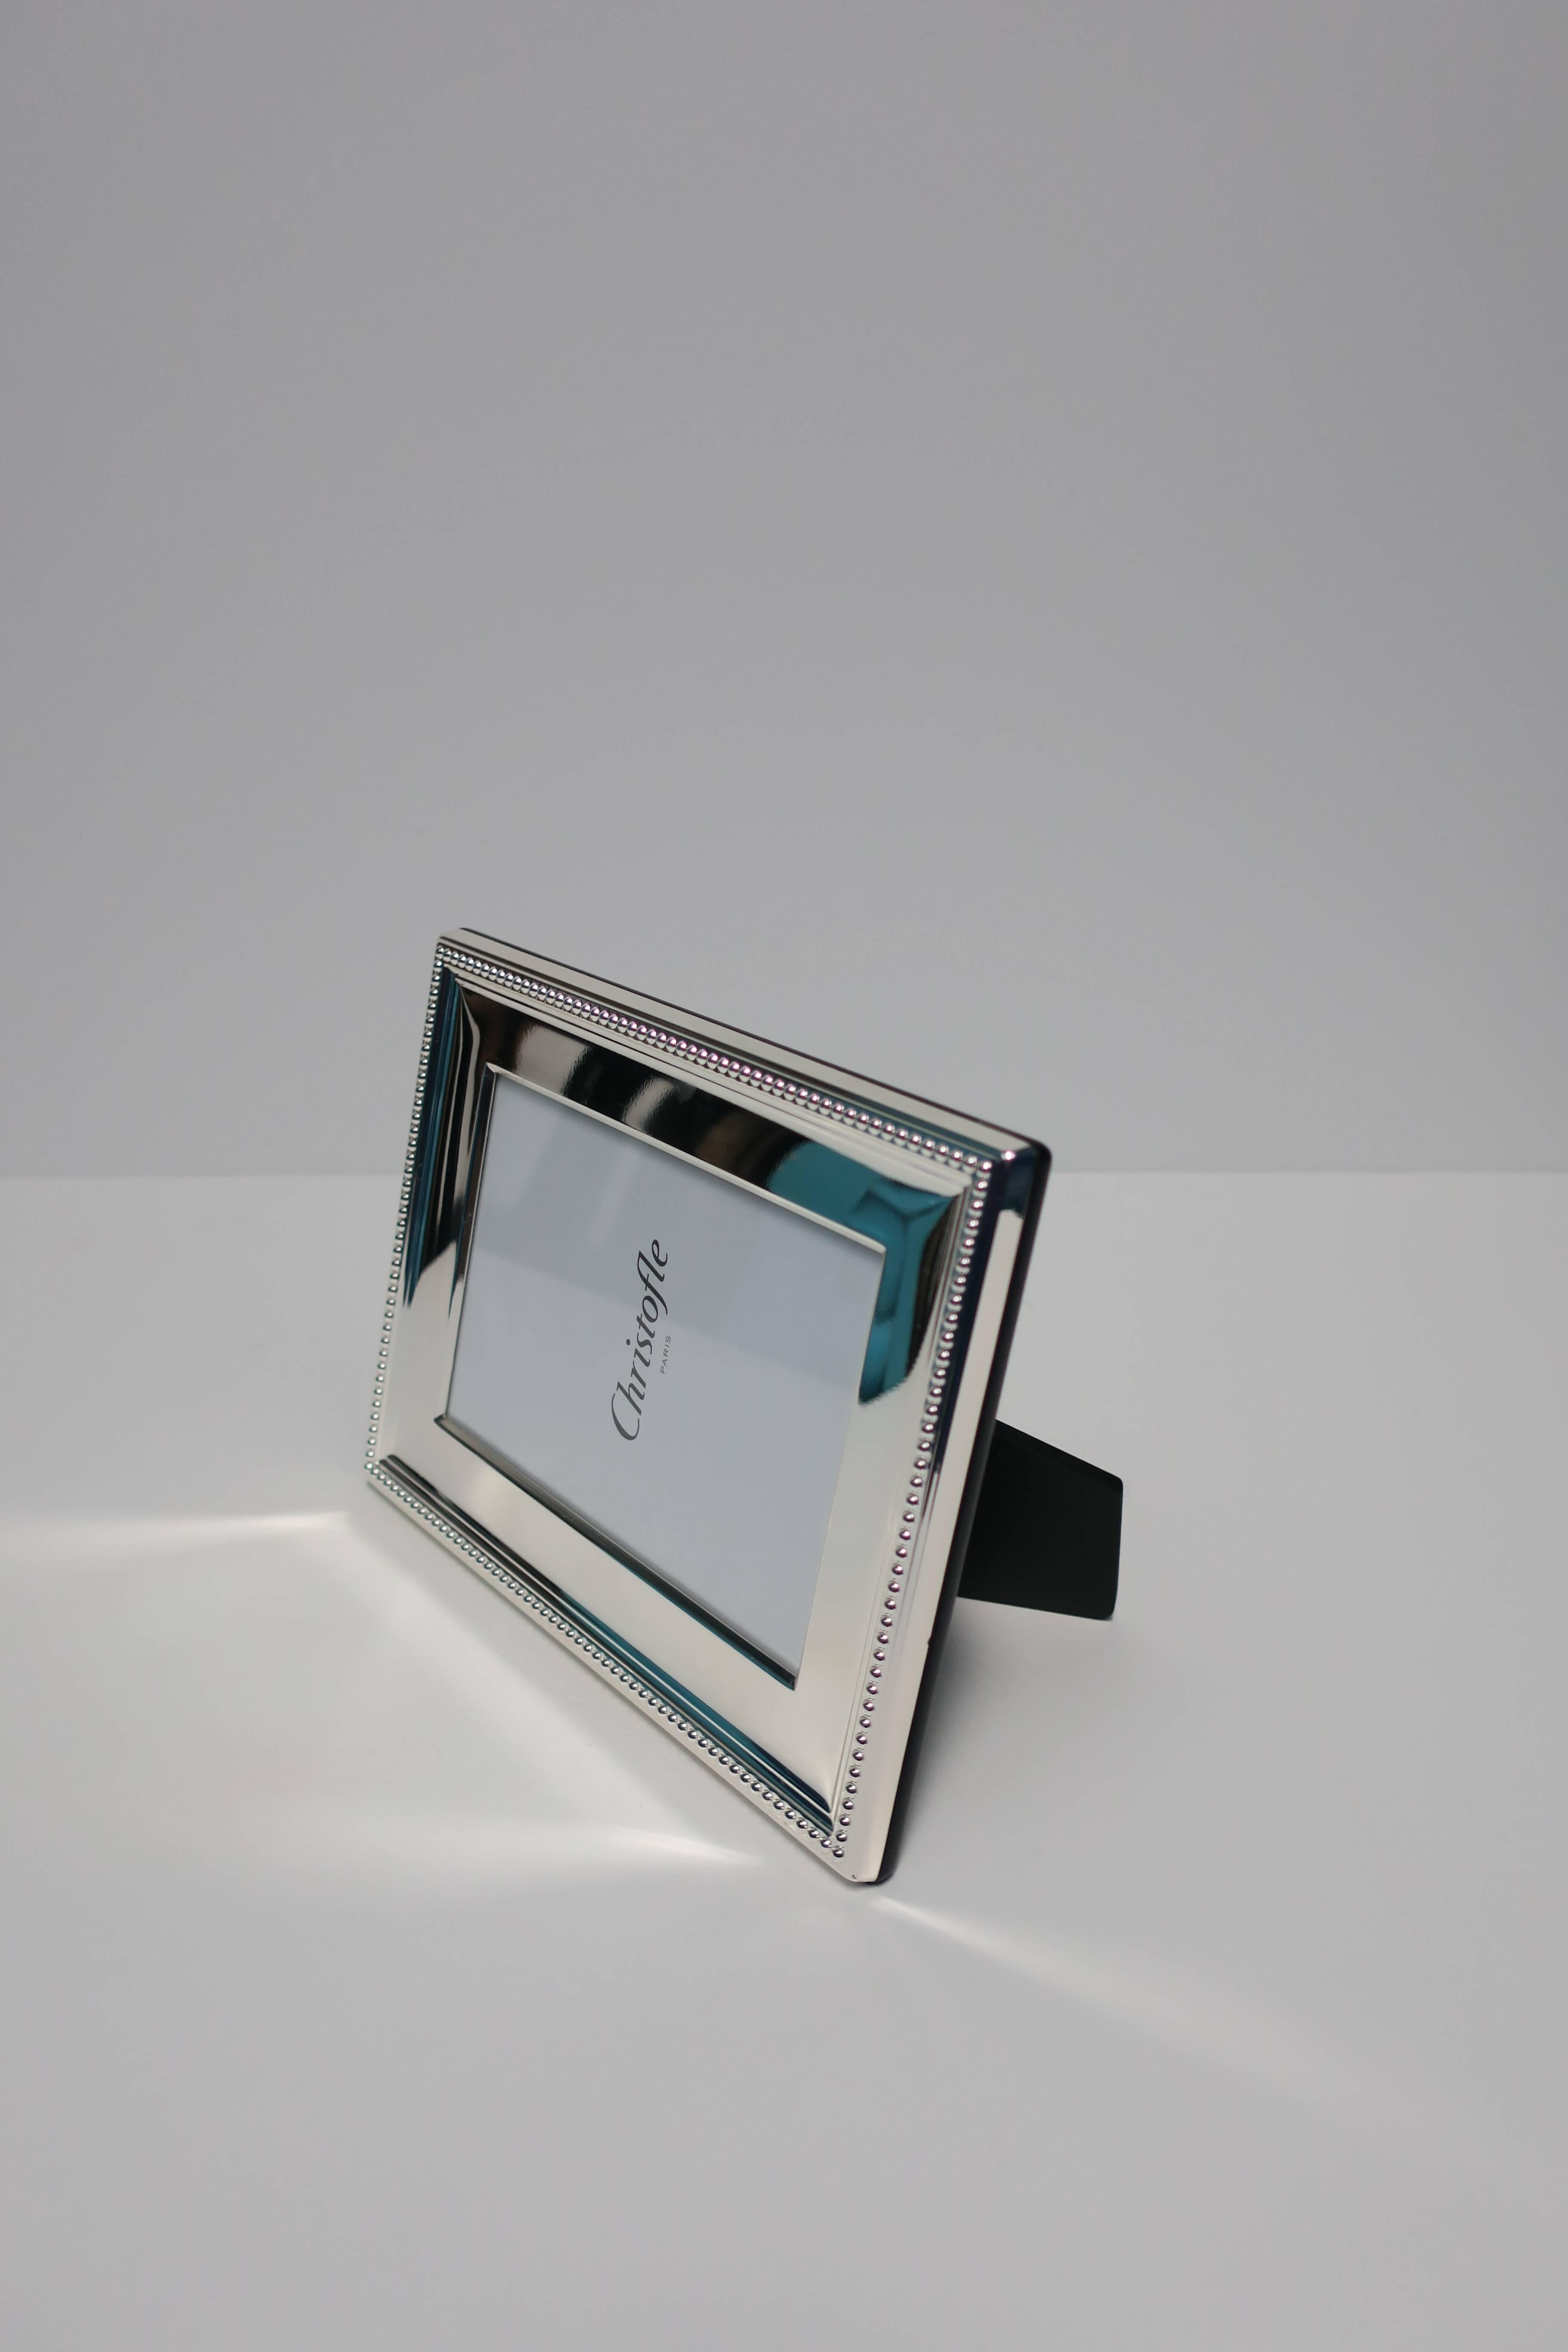 Plated Christofle Silver Plate Picture or Photo Frame, France